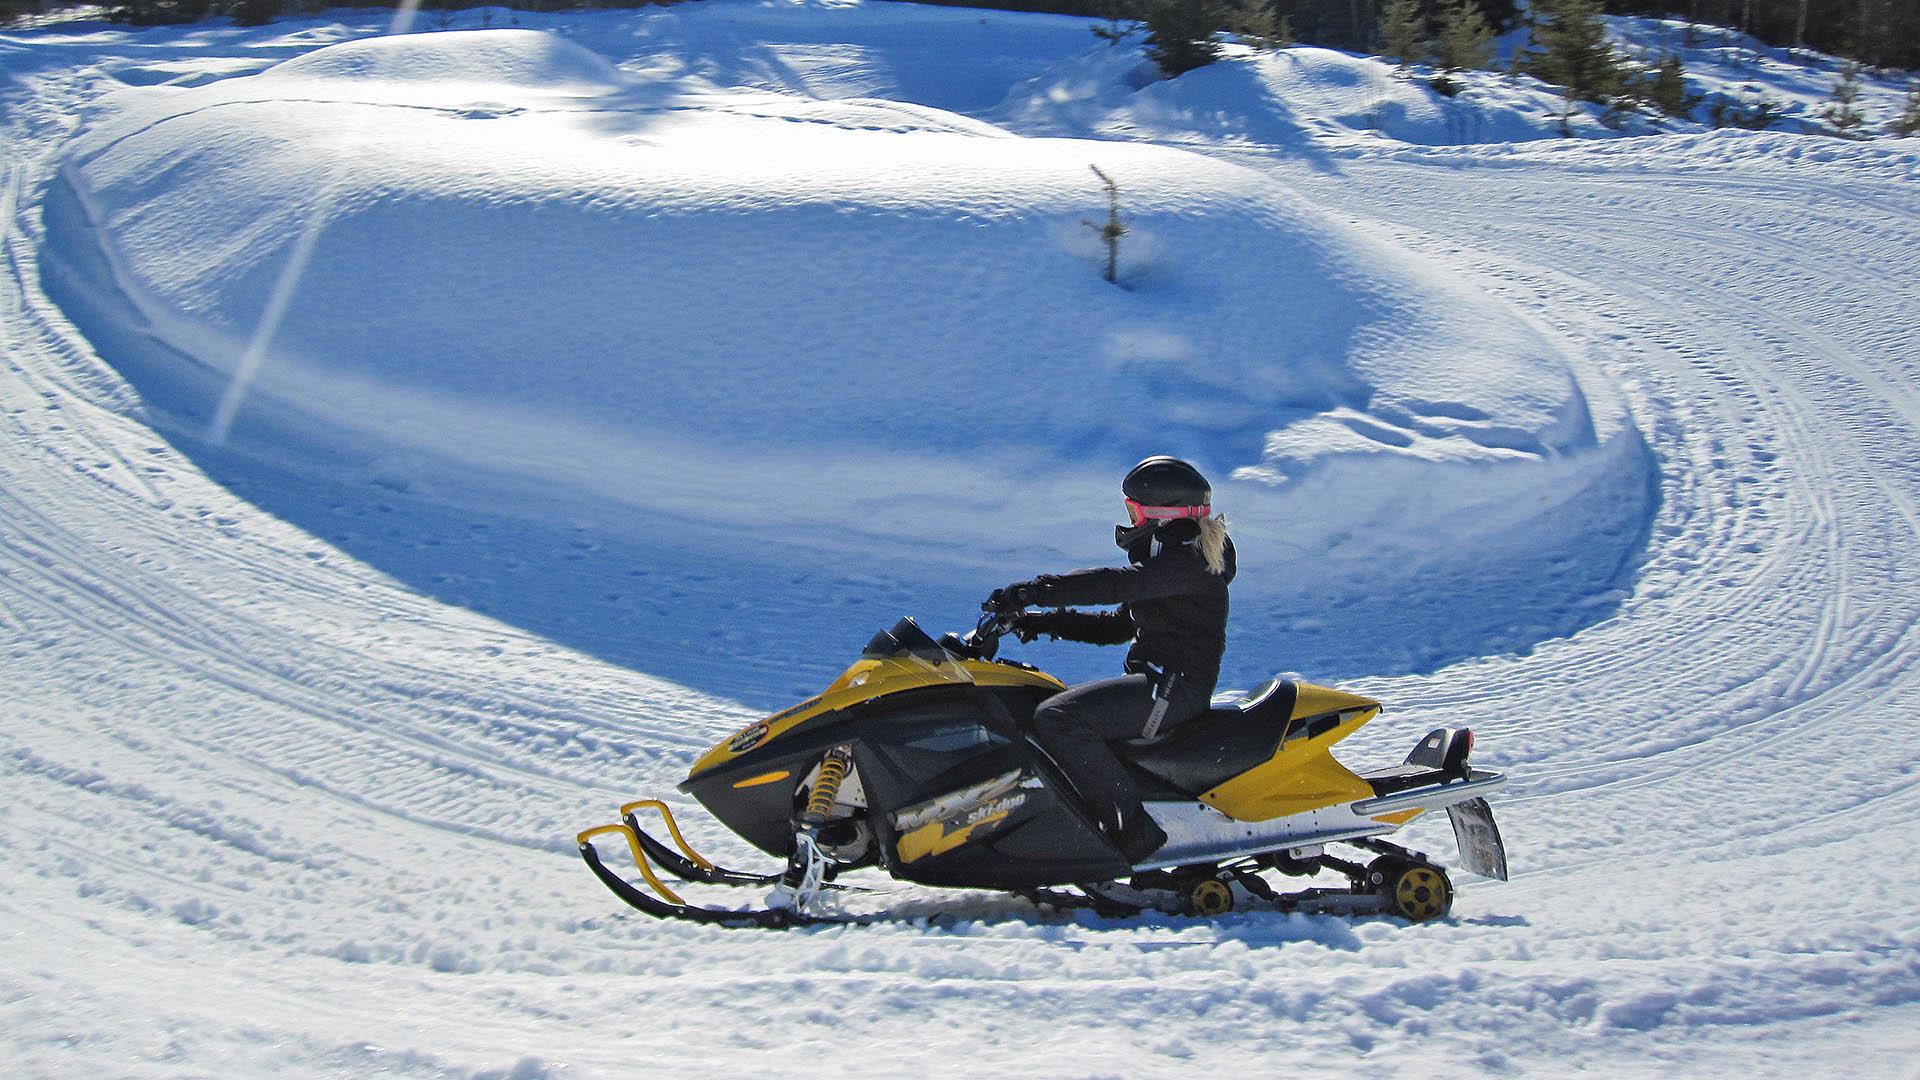 Snowmobile on a track.